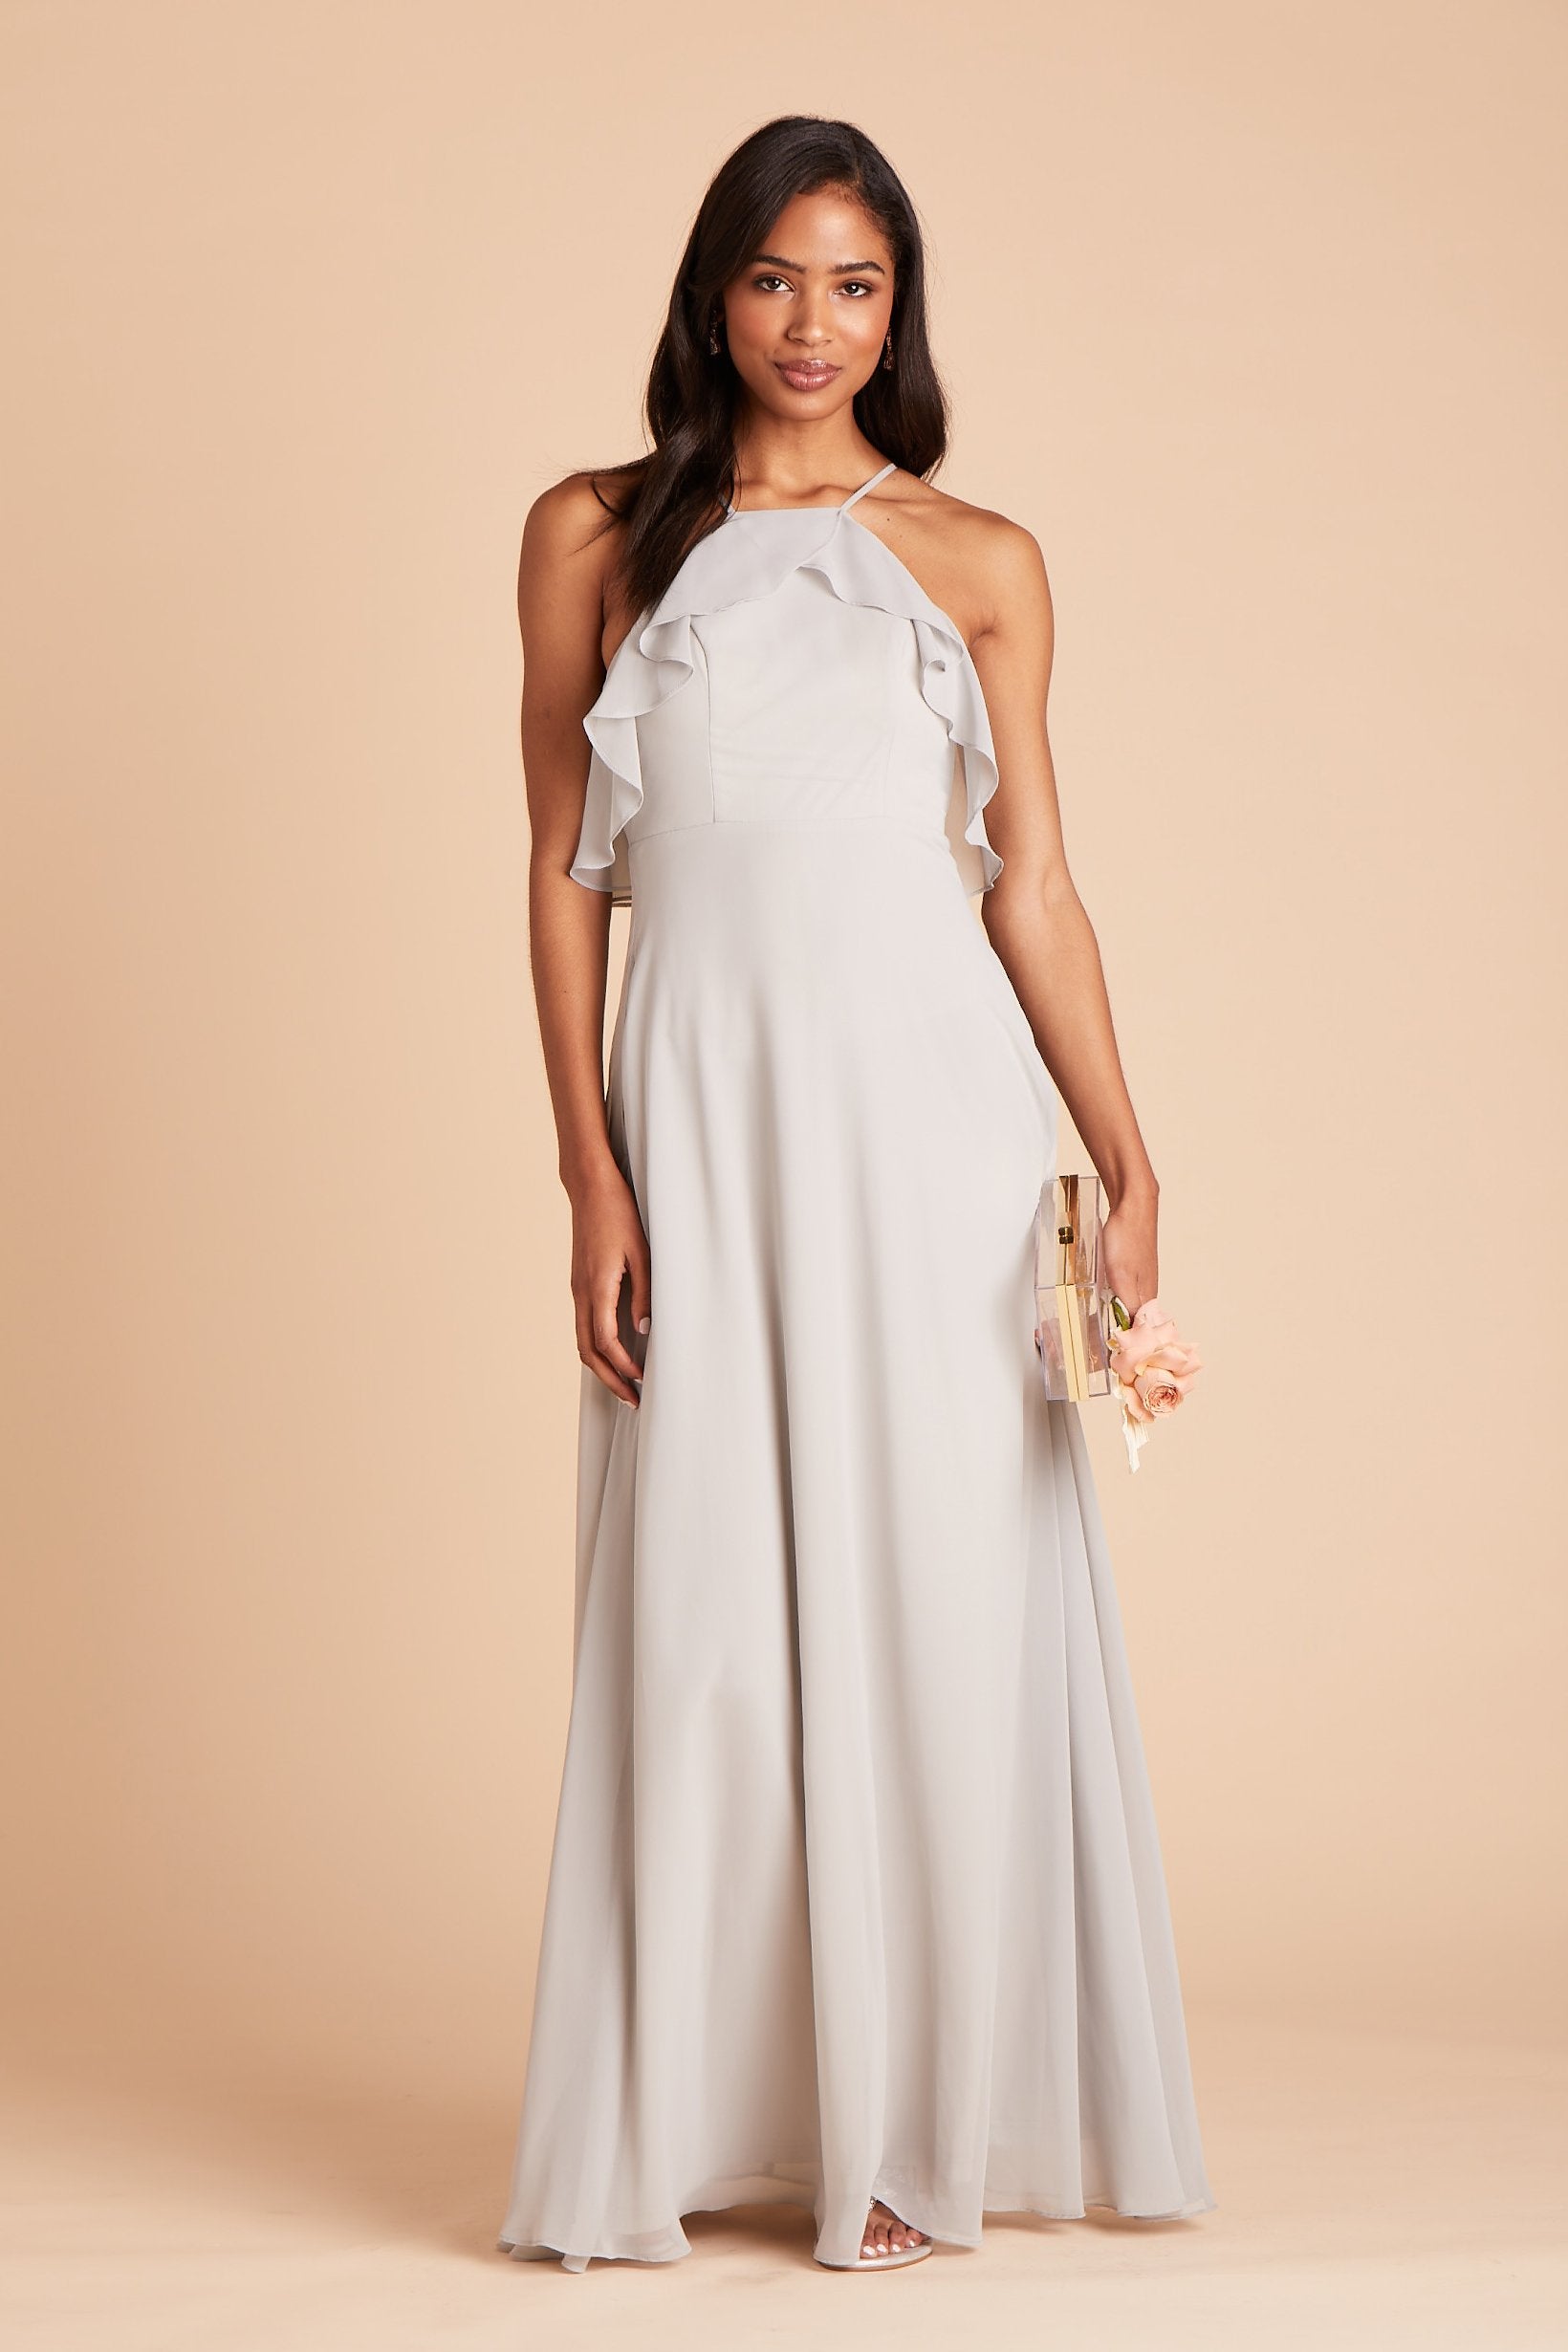 Jules bridesmaid dress in dove gray chiffon by Birdy Grey, front view